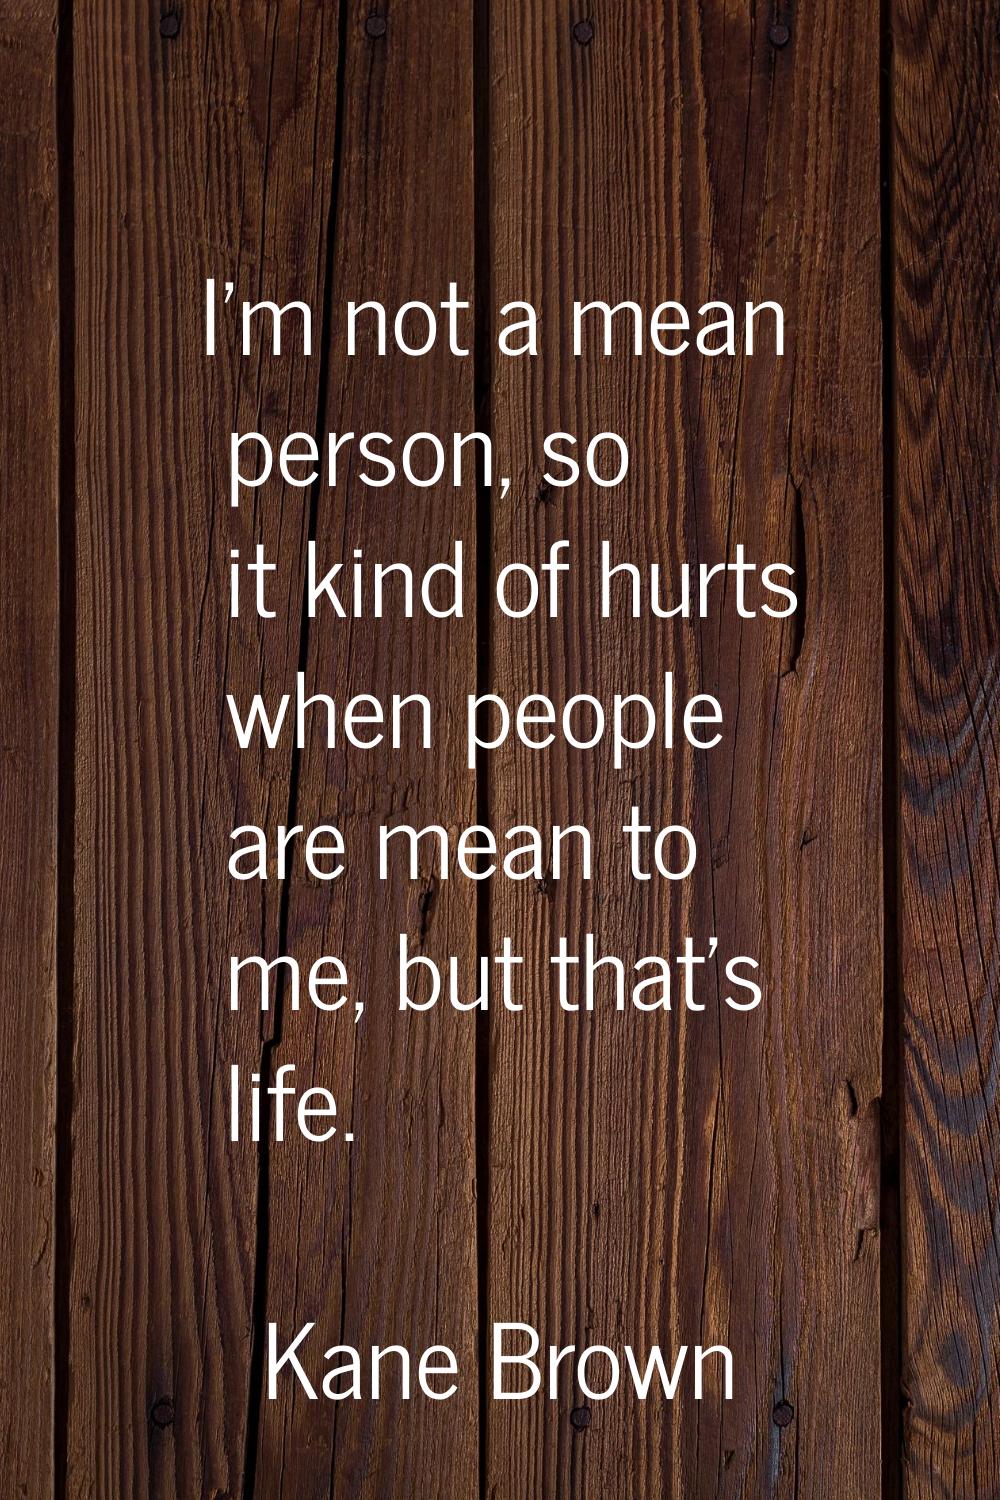 I'm not a mean person, so it kind of hurts when people are mean to me, but that's life.